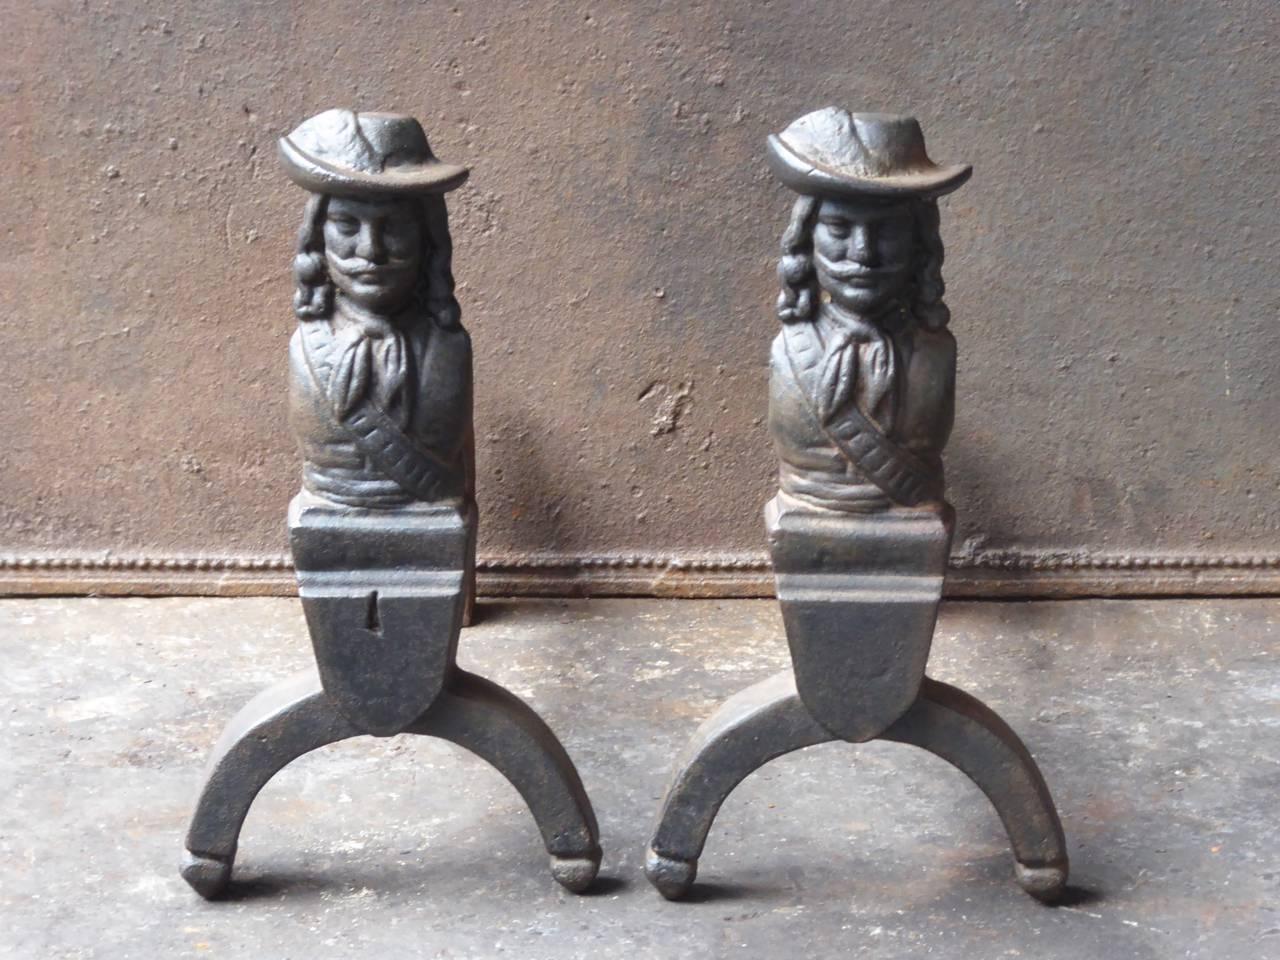 French D'Artagnan firedogs made of cast iron. D'Artagnan is the best known hero of the three musketeers.